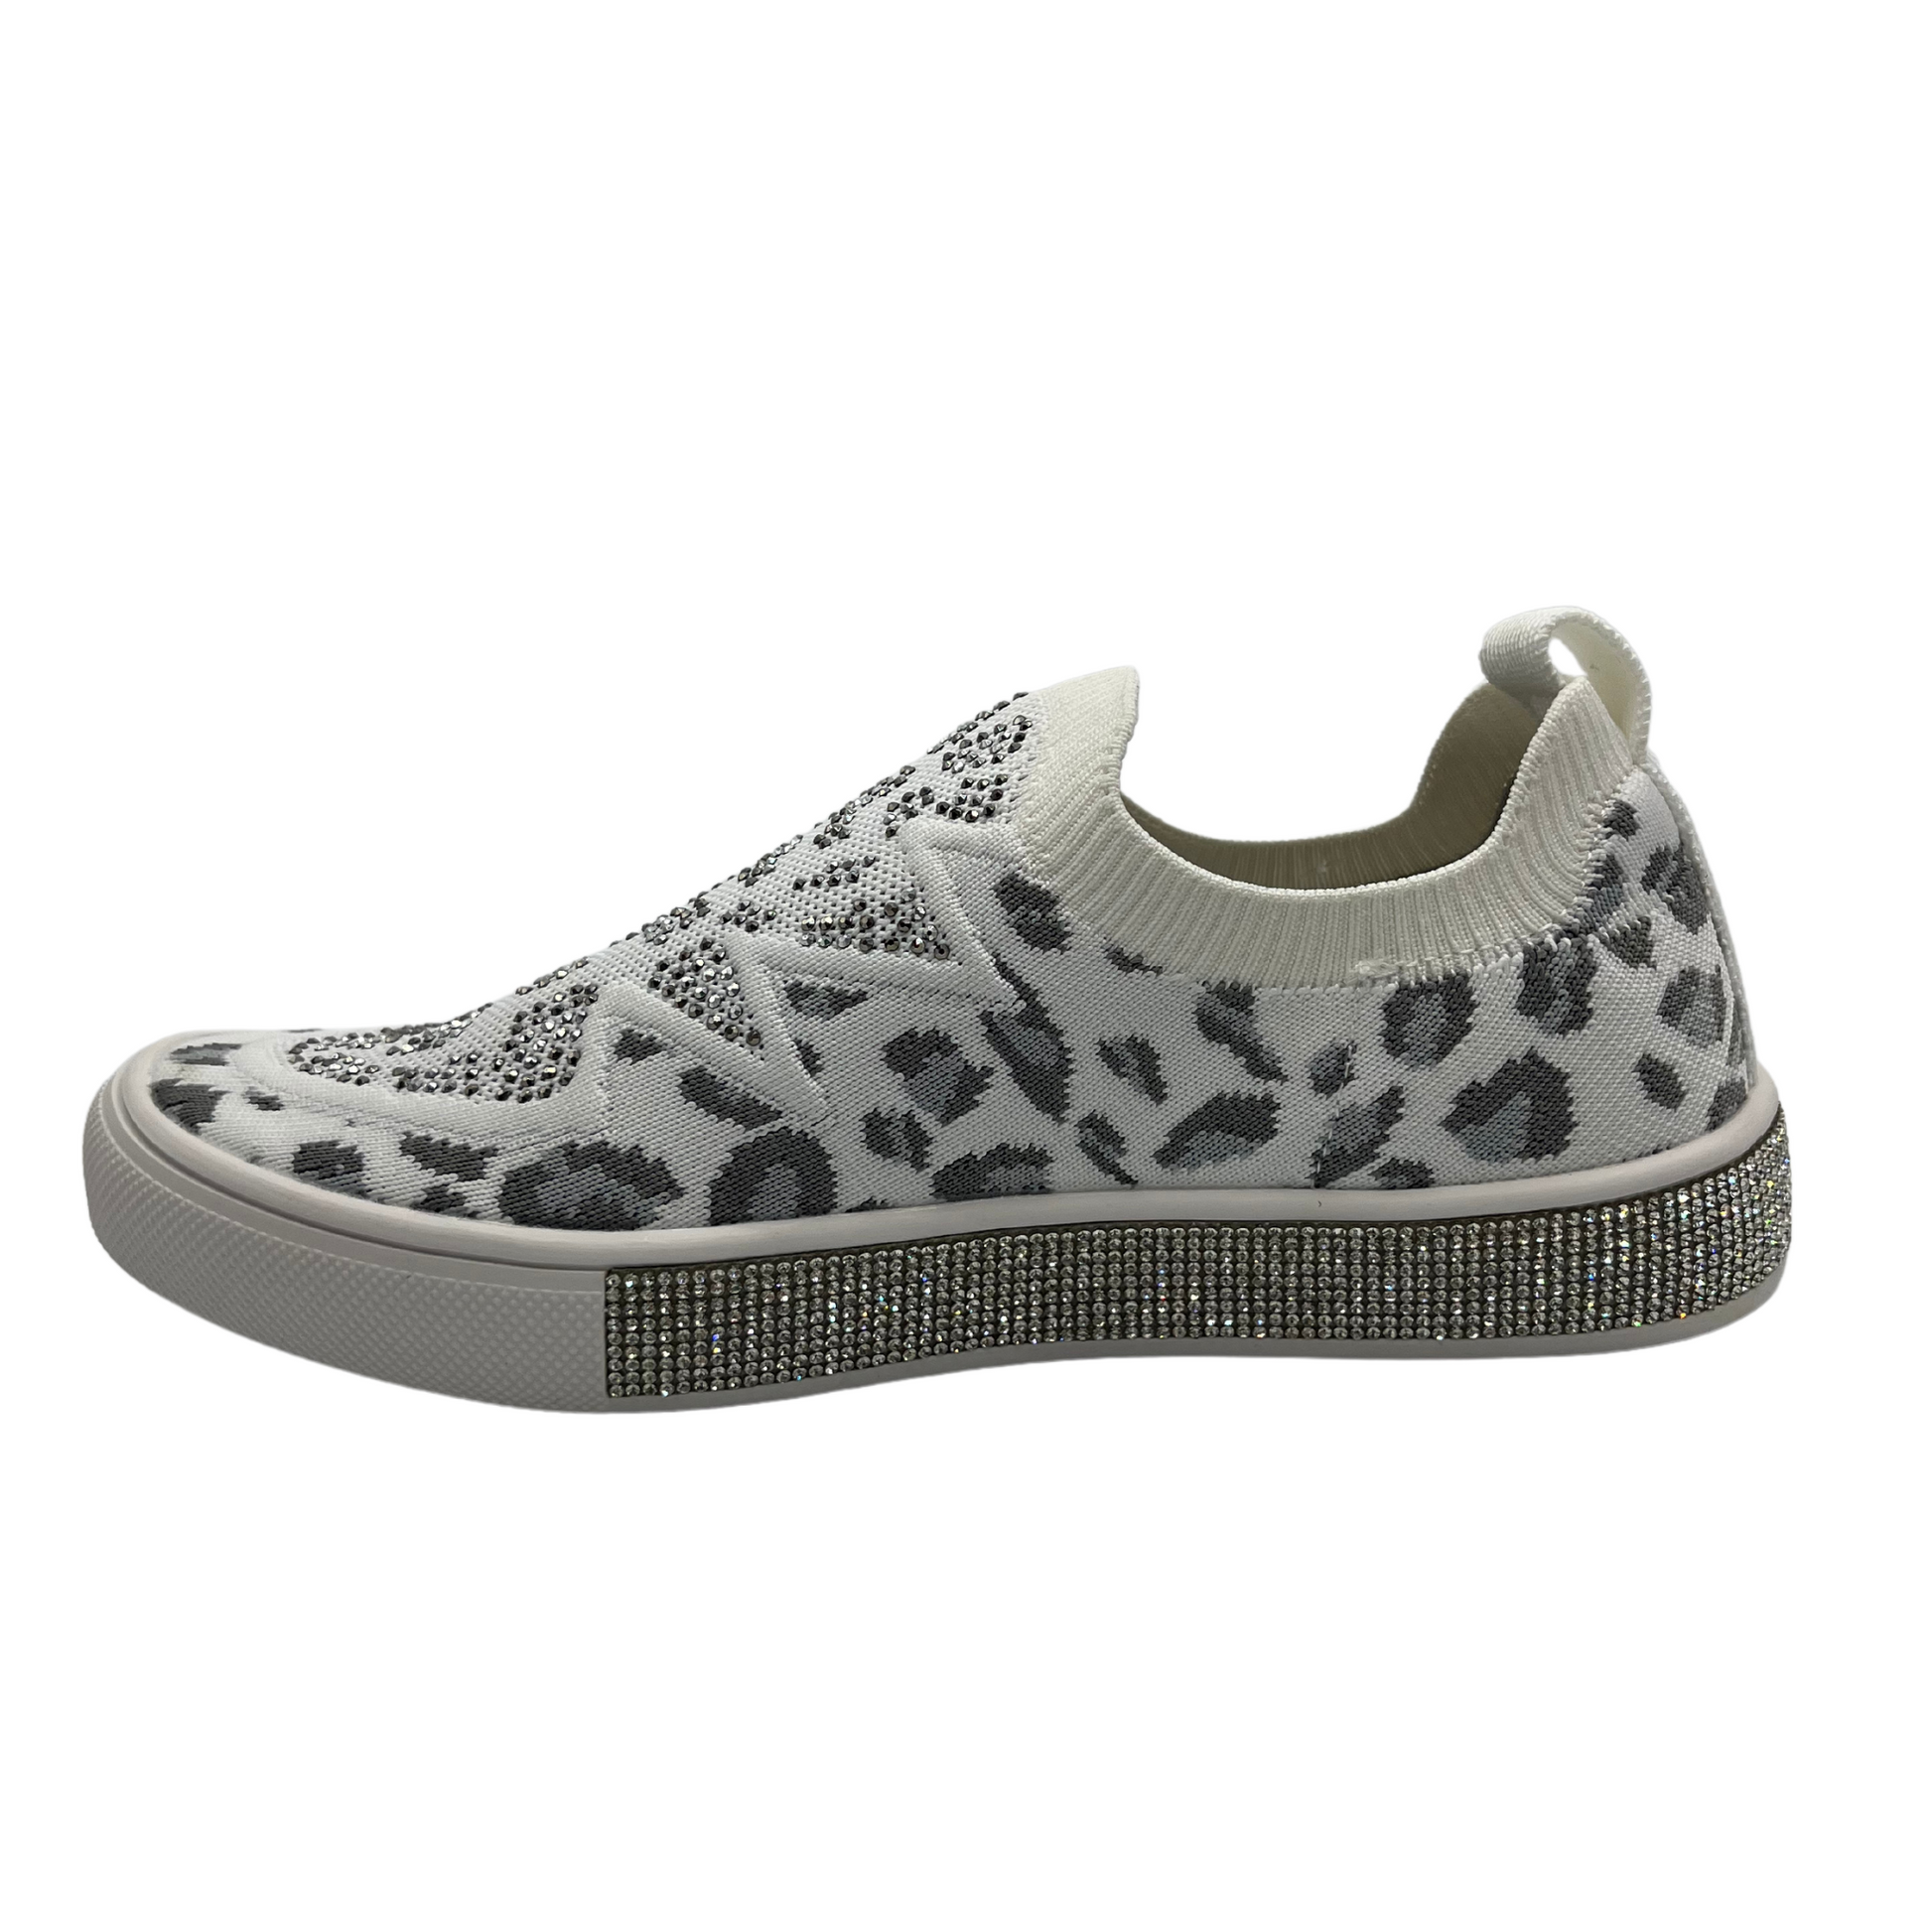 Left facing view of a slip on style sneaker in a fun leopard print with silver crystal accents. Shown in white